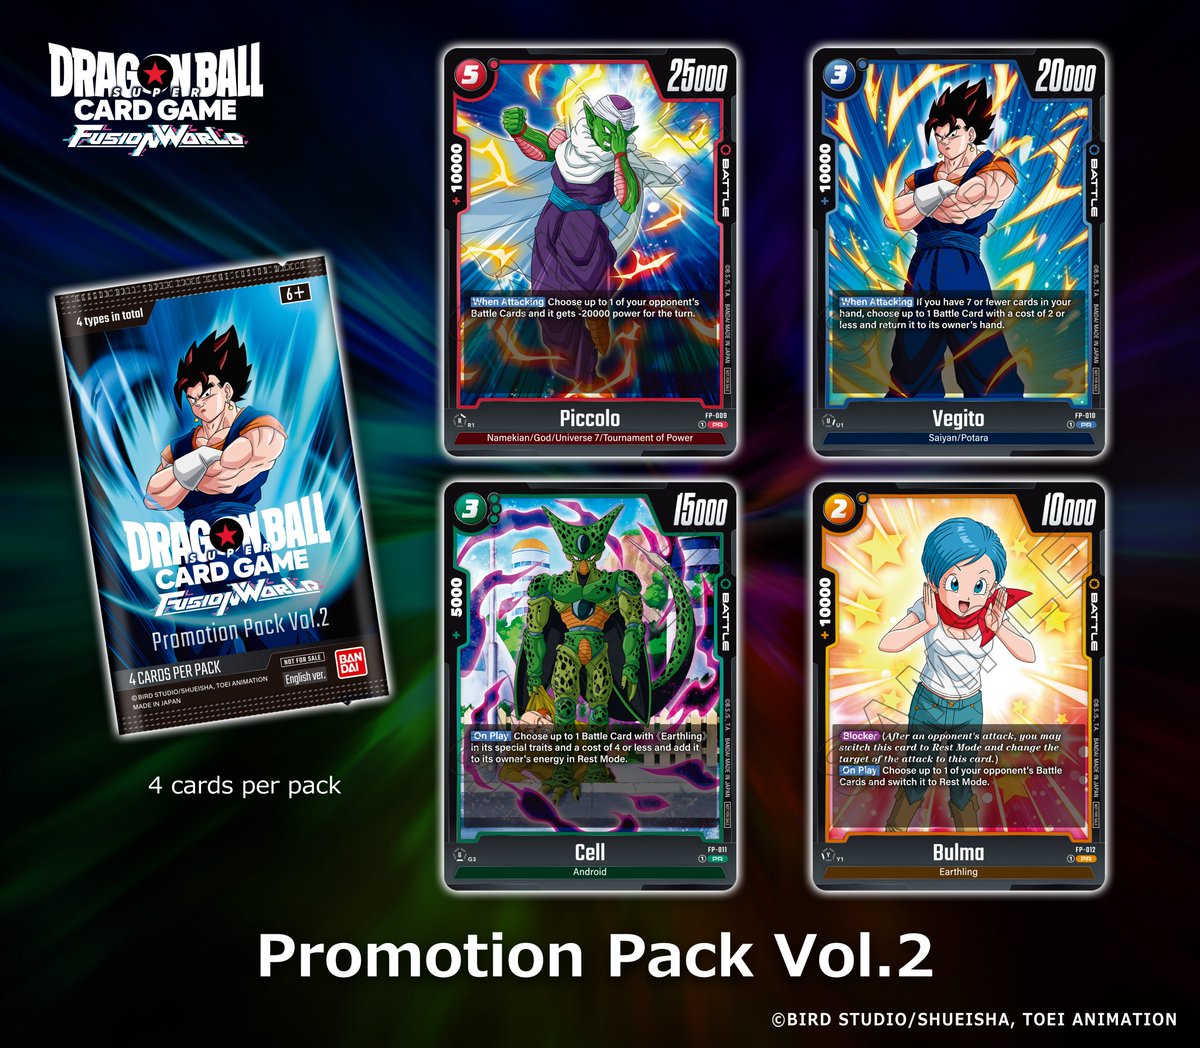 Hey Dragon Ball fans!
If you didn’t see it on the website yet, here is one of the prizes you can get in certain events, Promotion Pack Vol.2! What do you think of the card lineup?
Check the website for event details!
Link: x.gd/HXa4R
#dbfw
#fusionworld
#dbscardgame